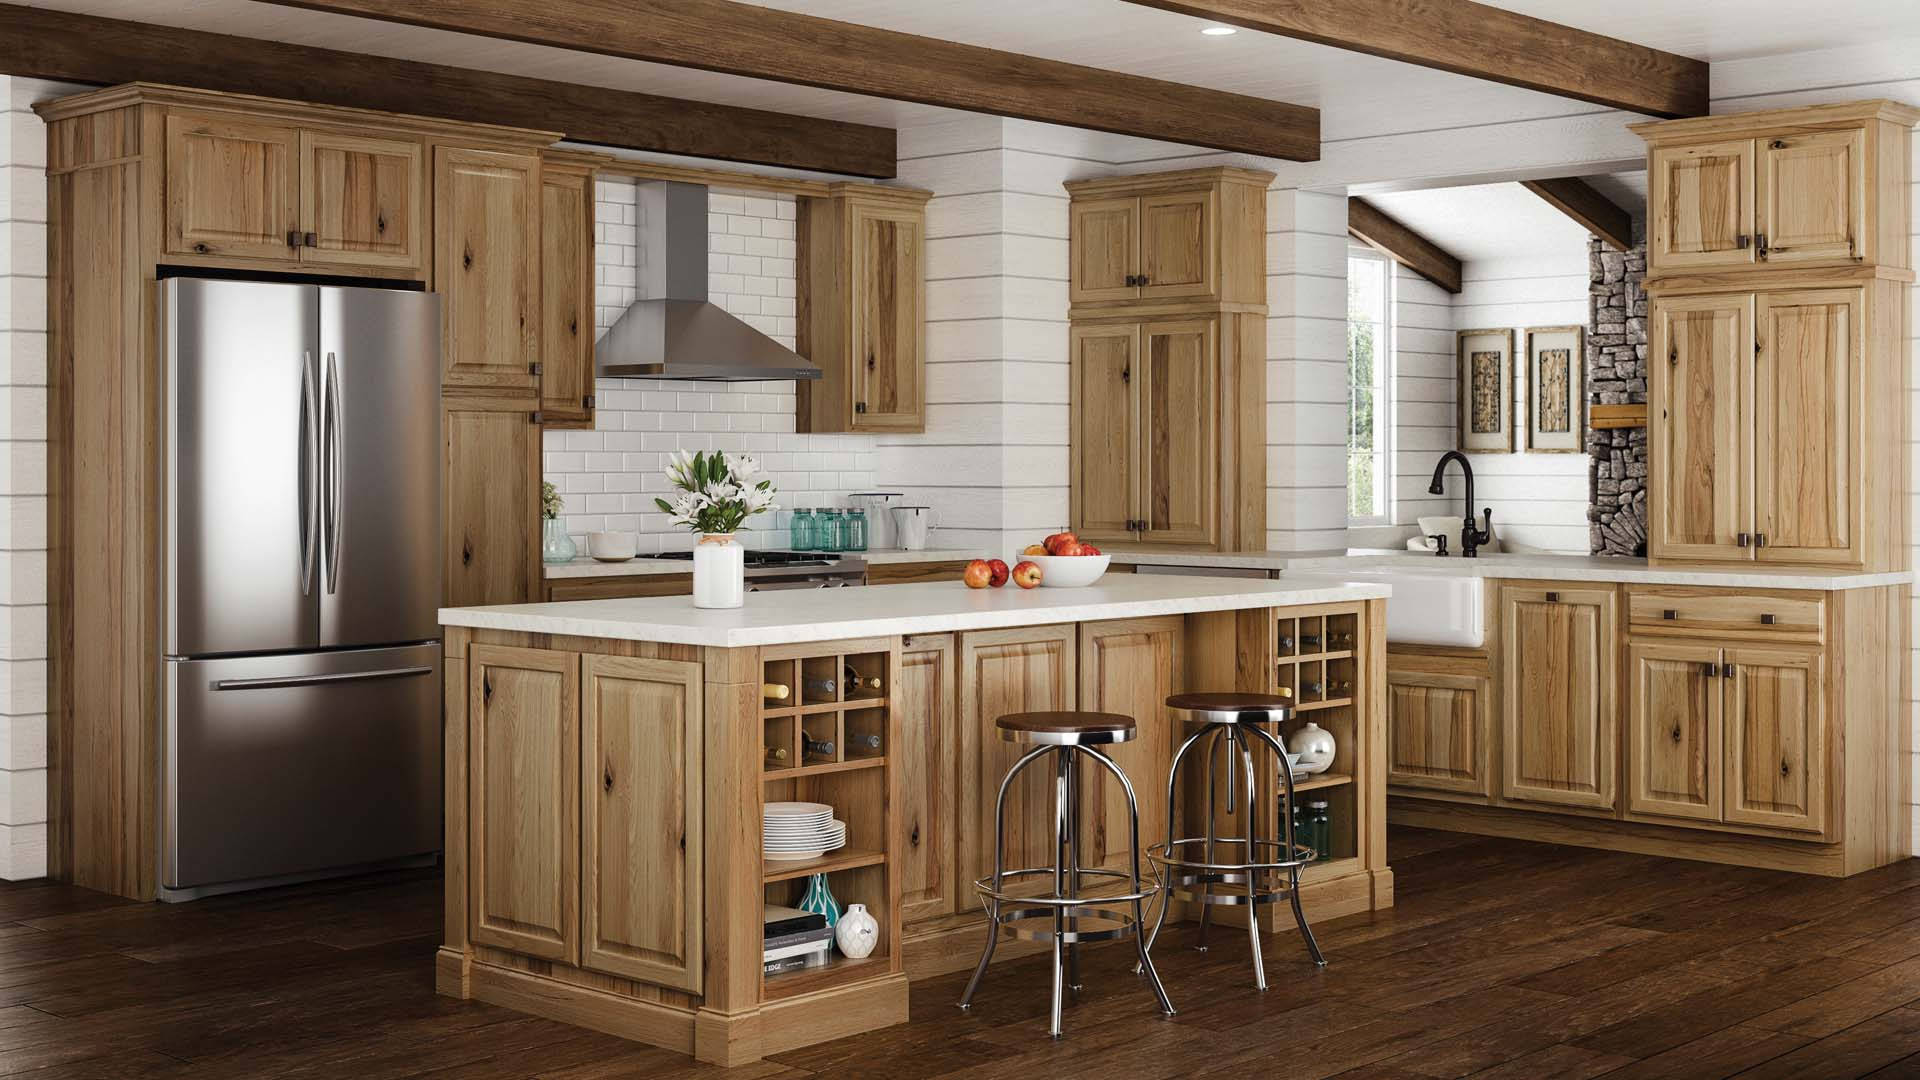 Home Depot Kitchen Cabinet
 Hampton Wall Kitchen Cabinets in Natural Hickory – Kitchen